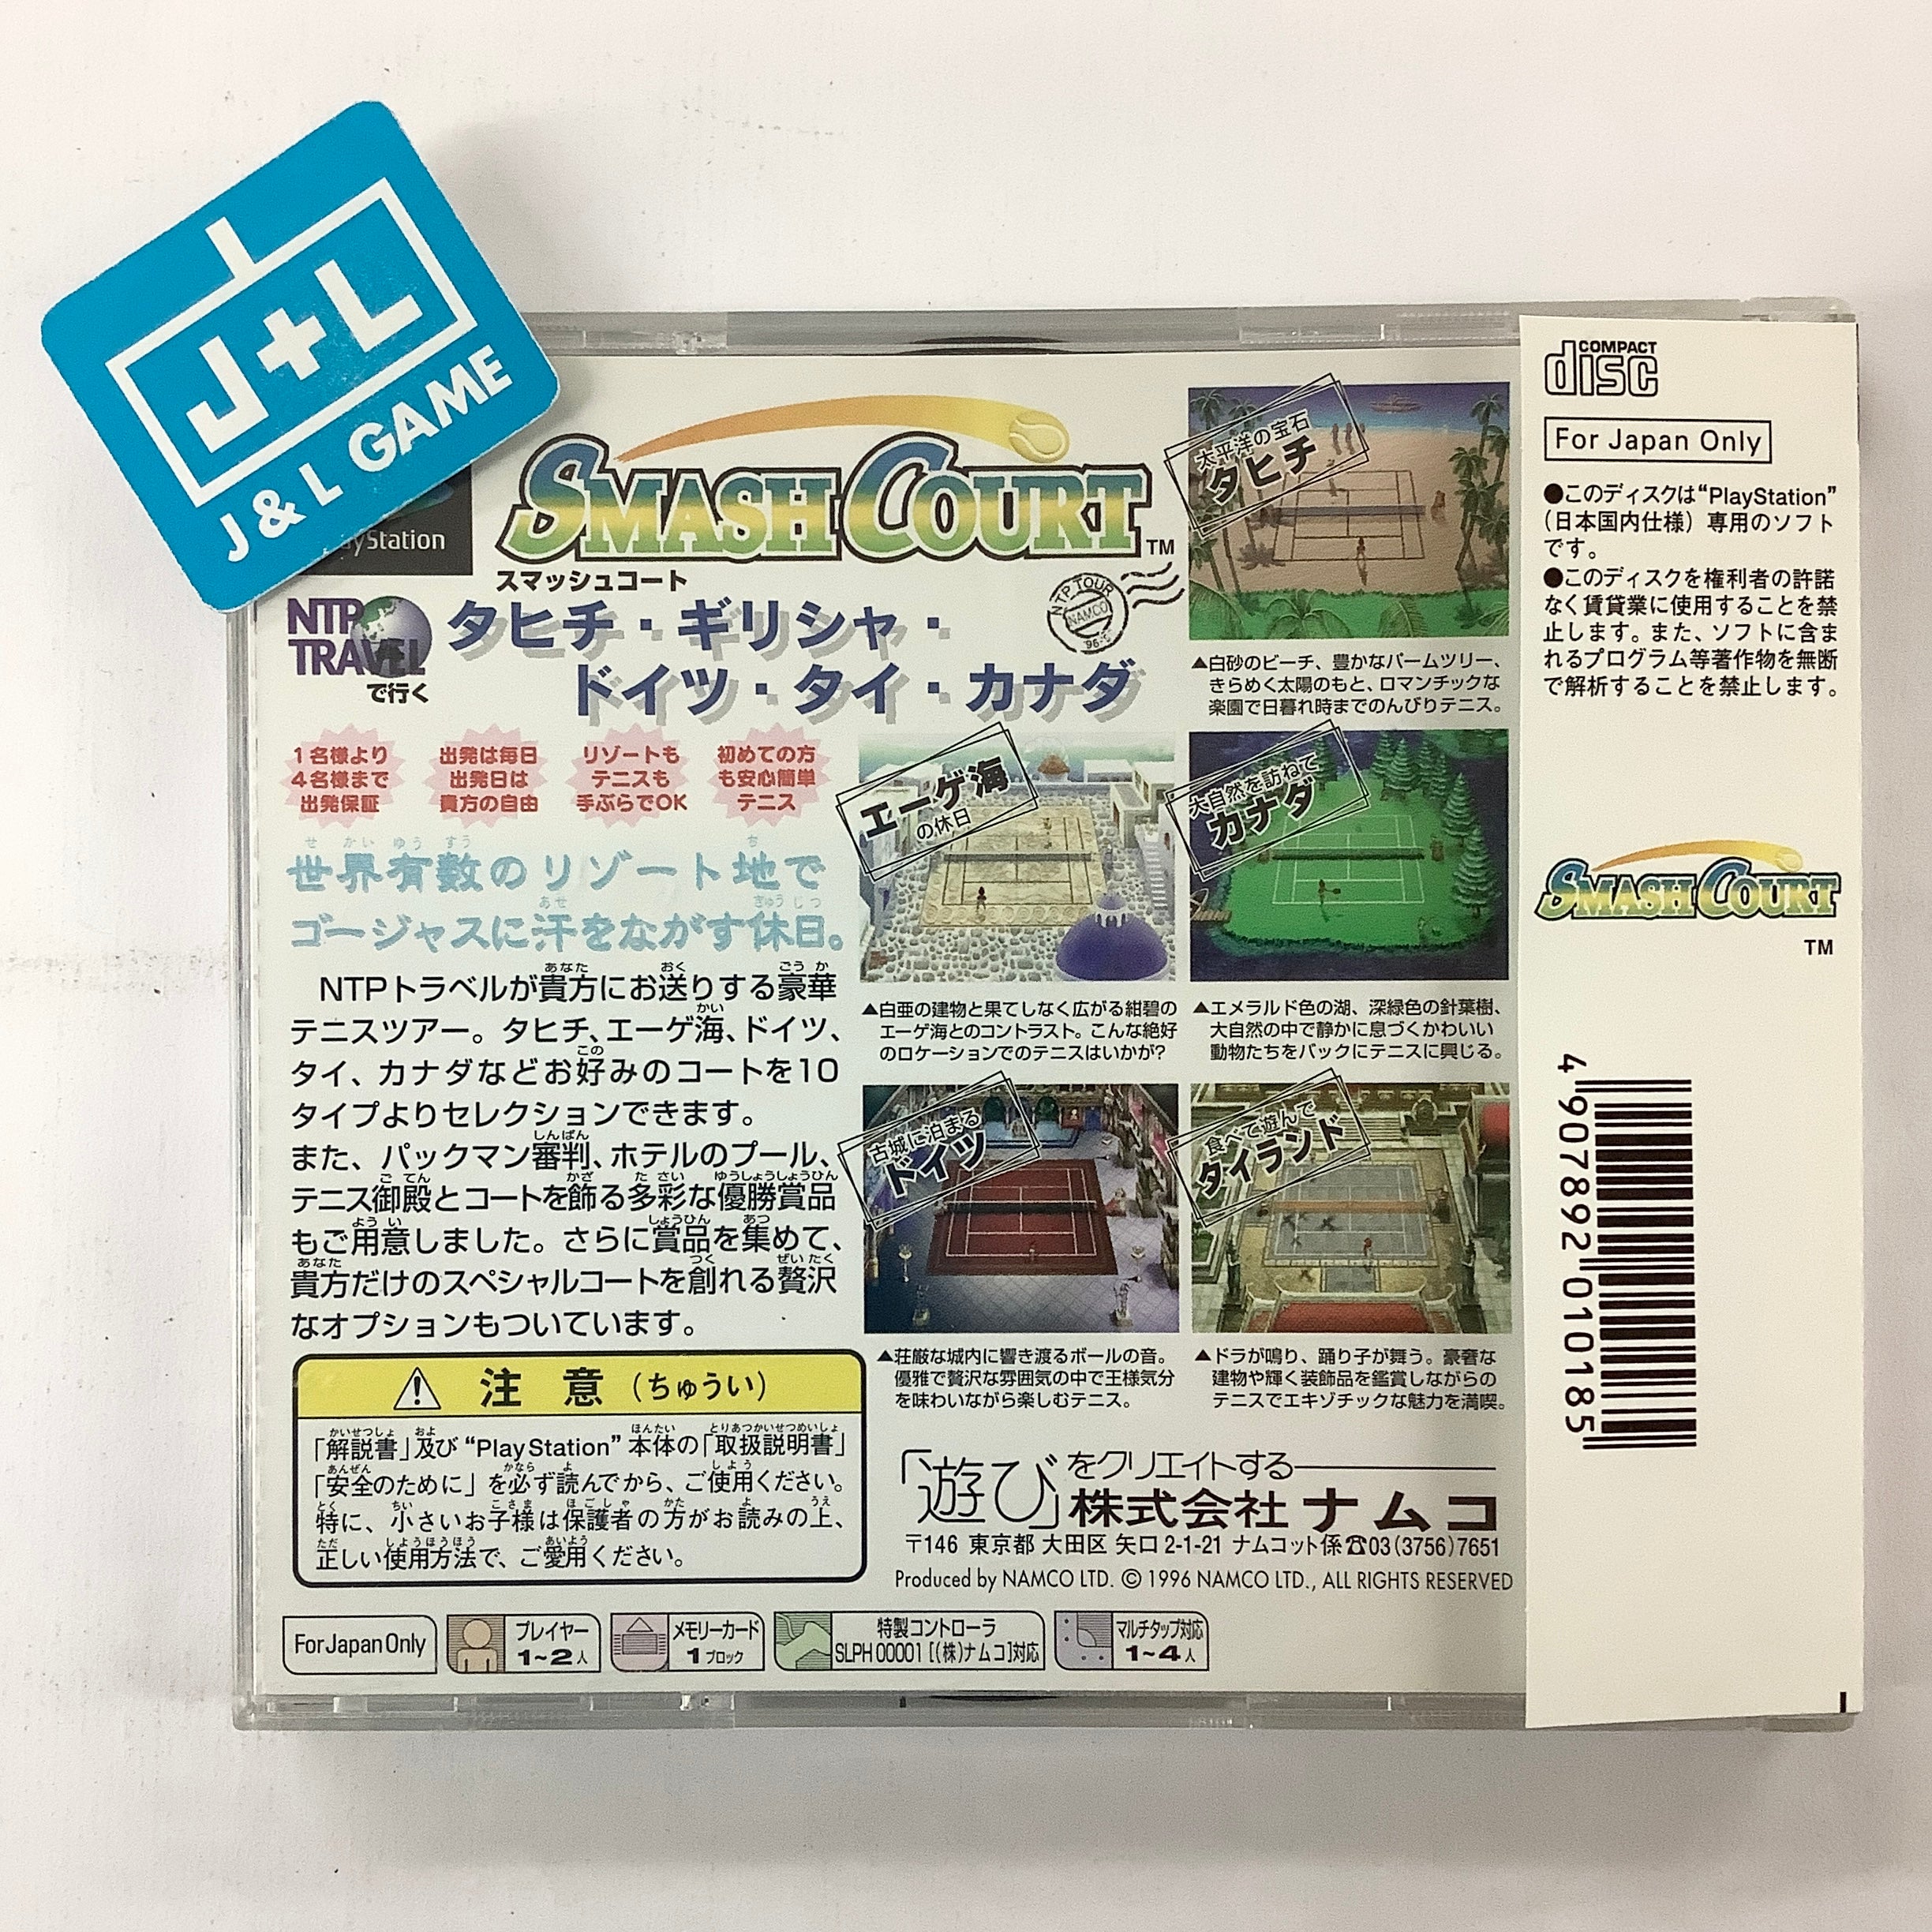 Smash Court - (PS1) PlayStation 1 (Japanese Import) [Pre-Owned] Video Games Namco   